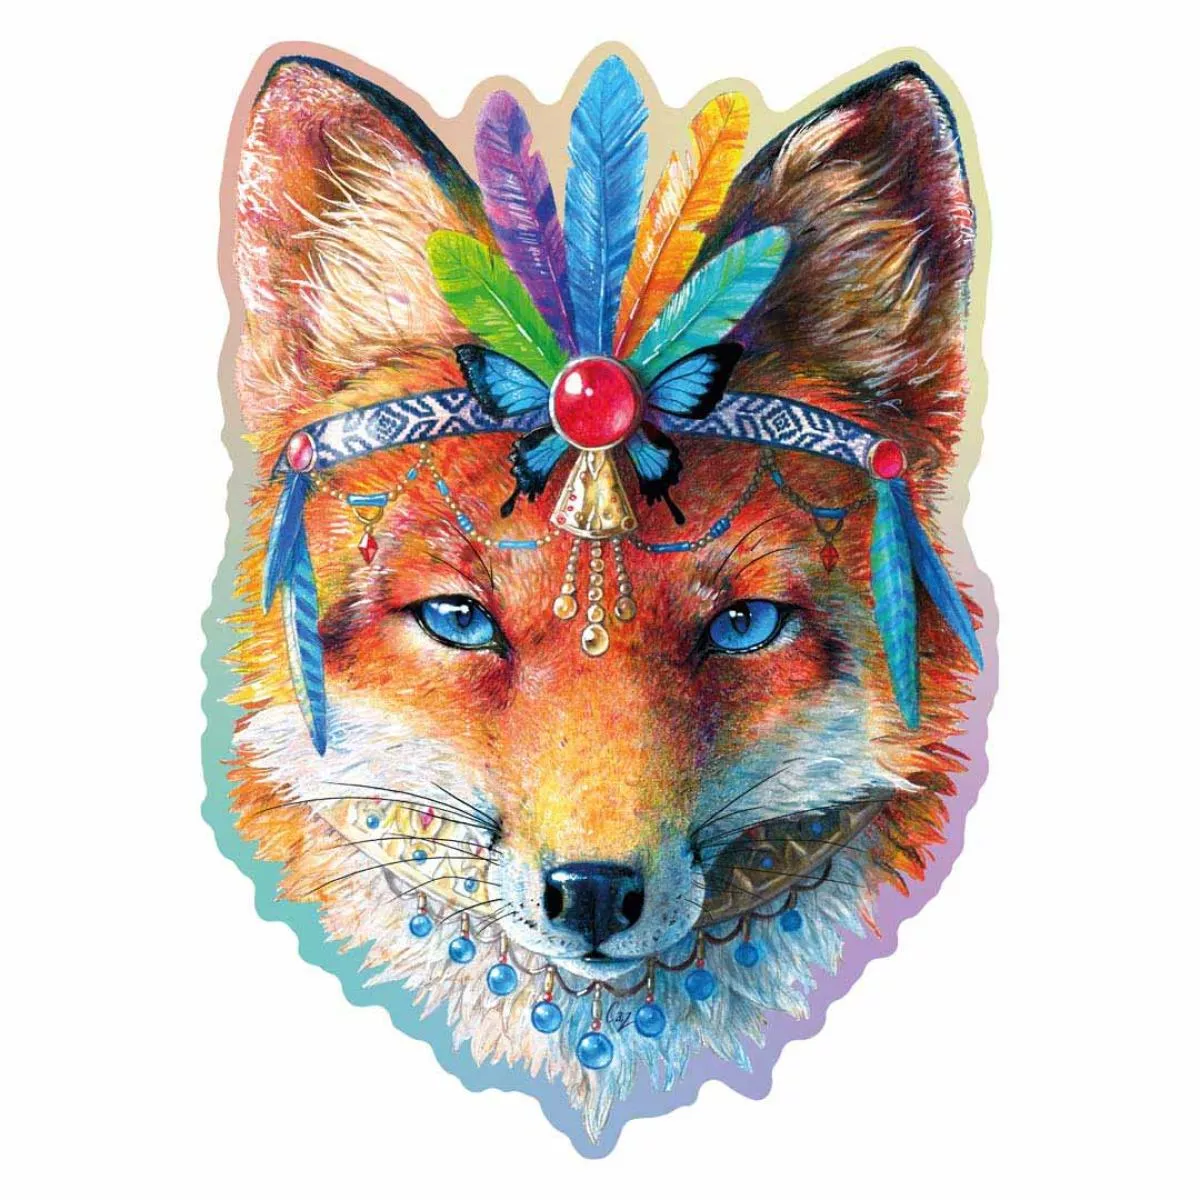 Farbenfrohes Holz-Puzzle "Mystic Fox" – 150 Teile in 20 Formen